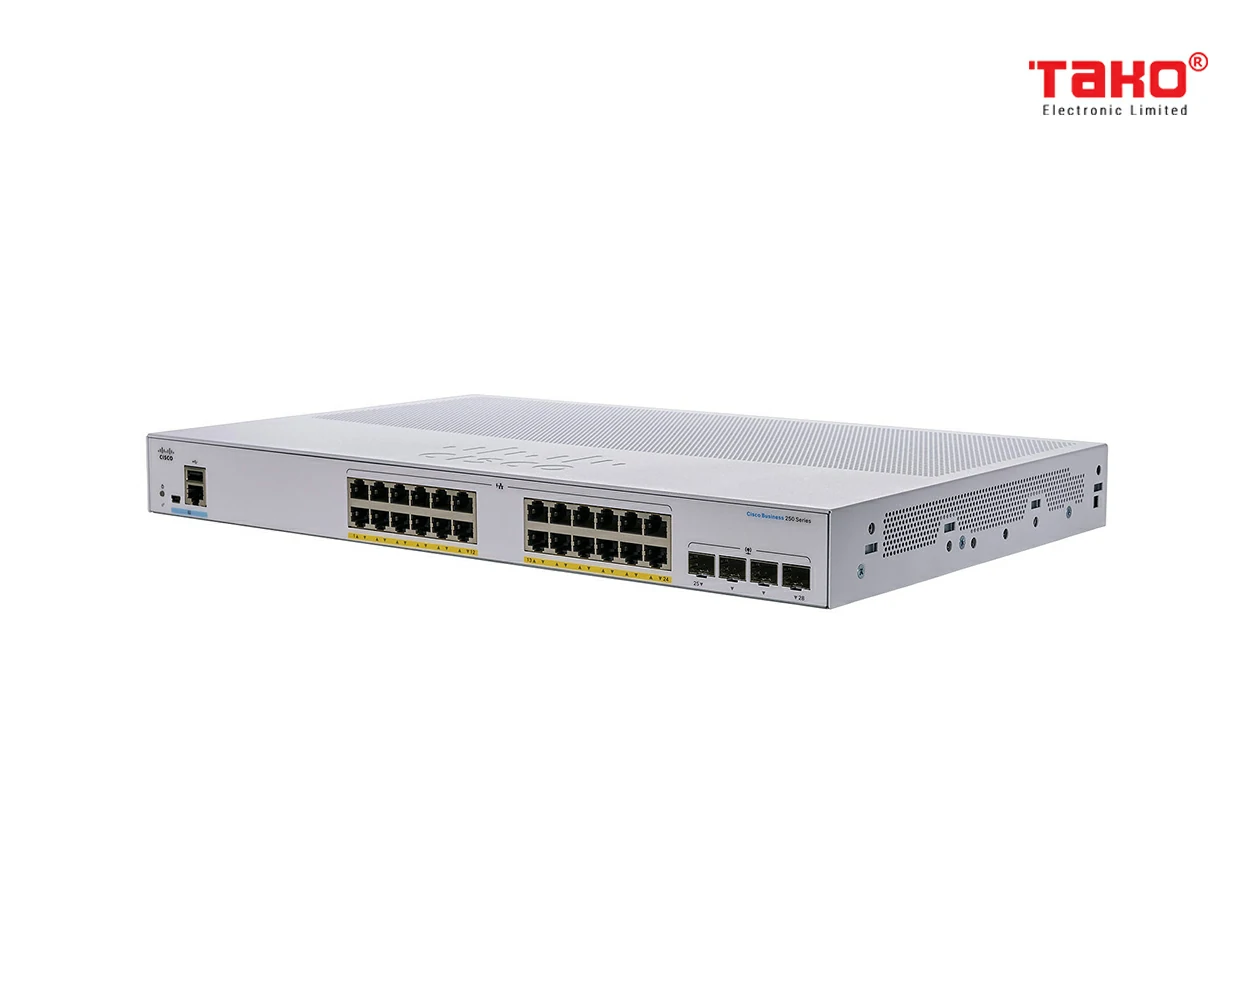 Cisco CBS250-24FP-4G 24-port 10/100/1000 Mbps PoE Layer 2 manageable web switch 4 SFP slots 2